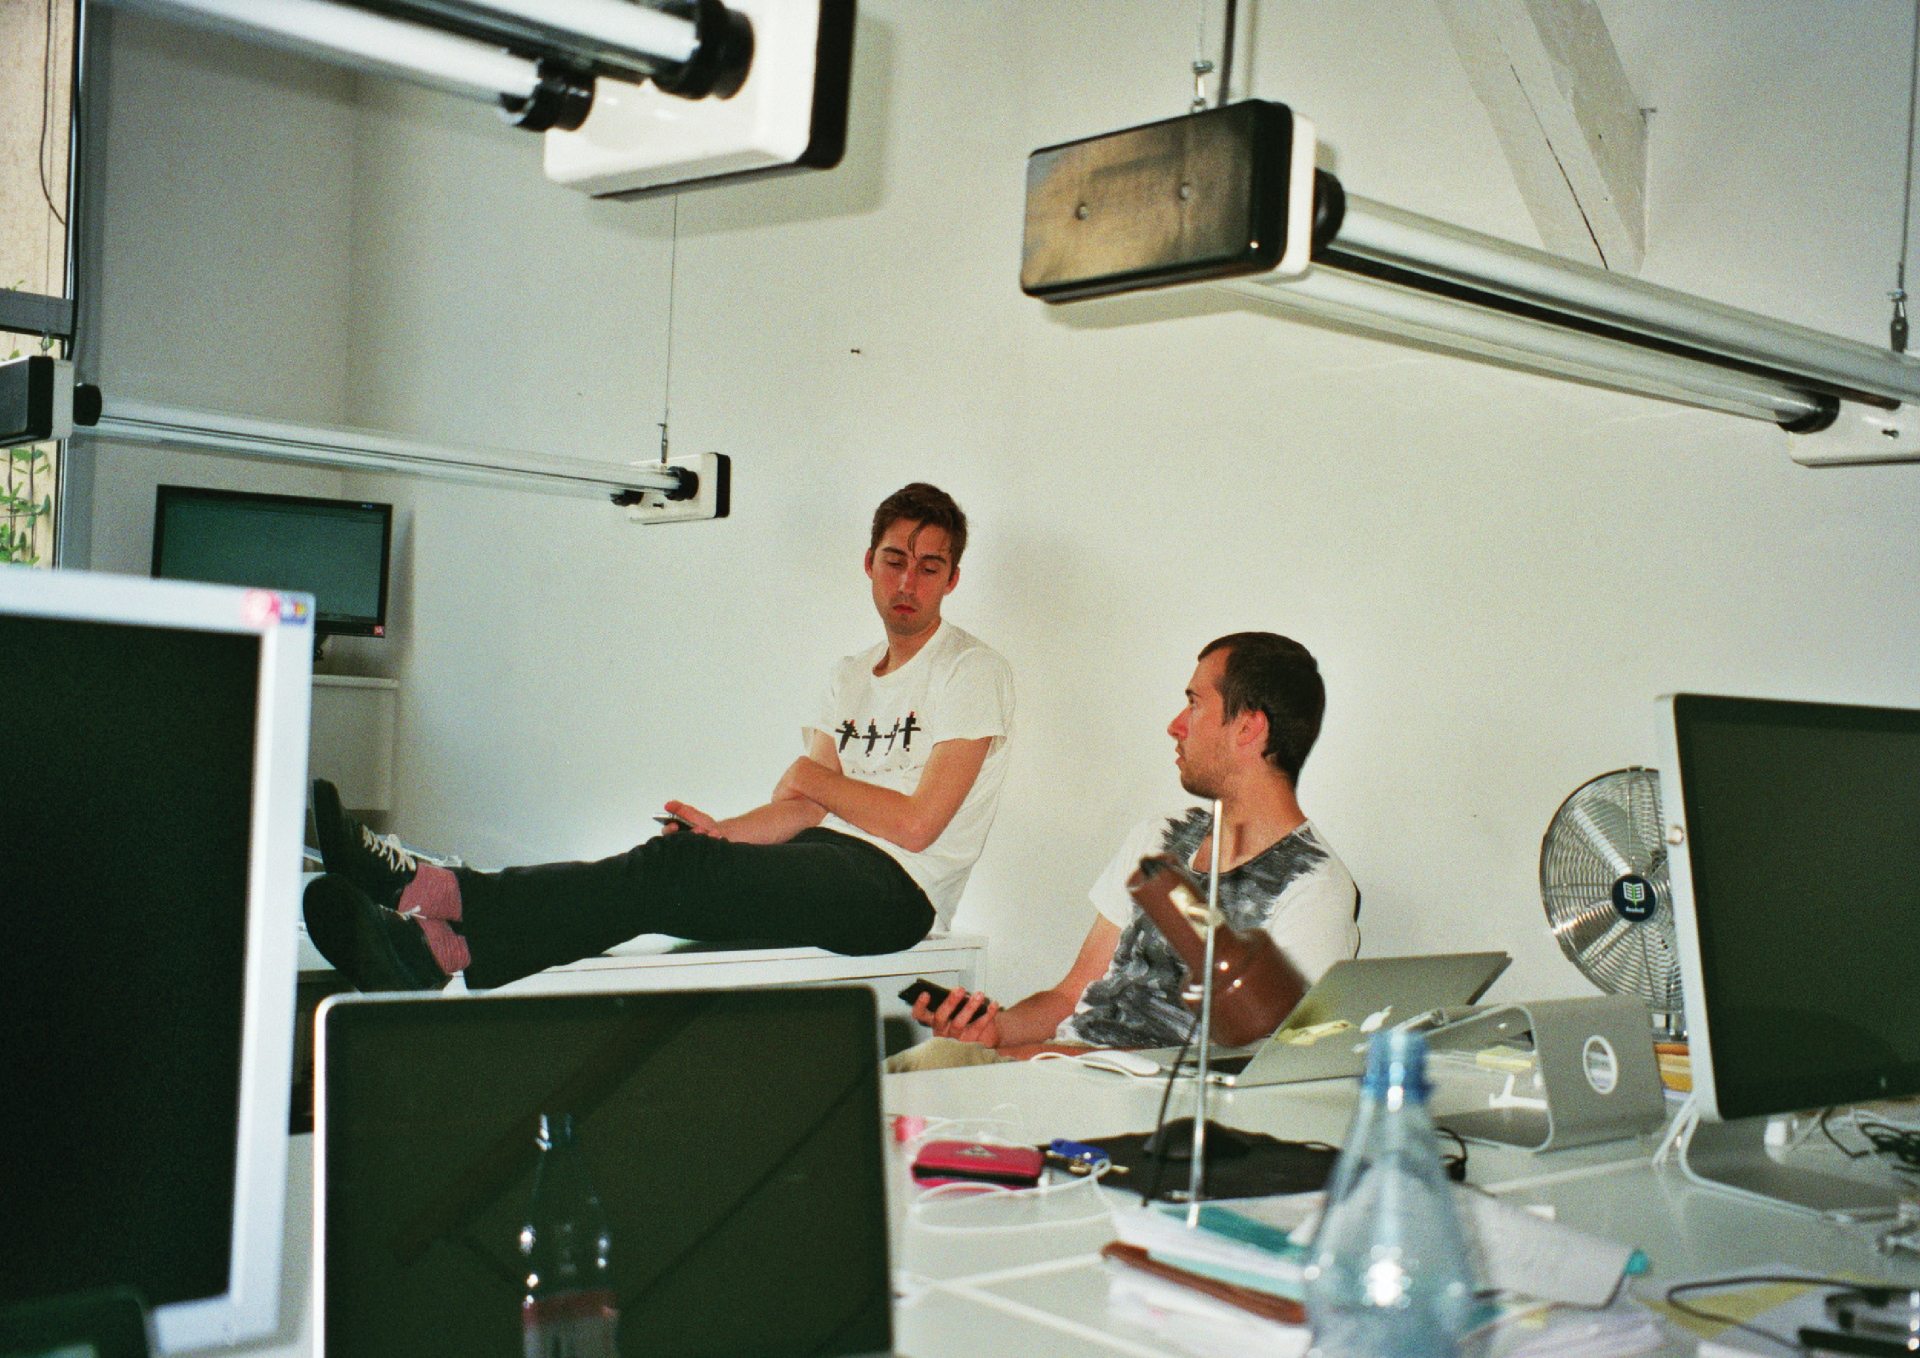 Tomaz and David in the Readmill office